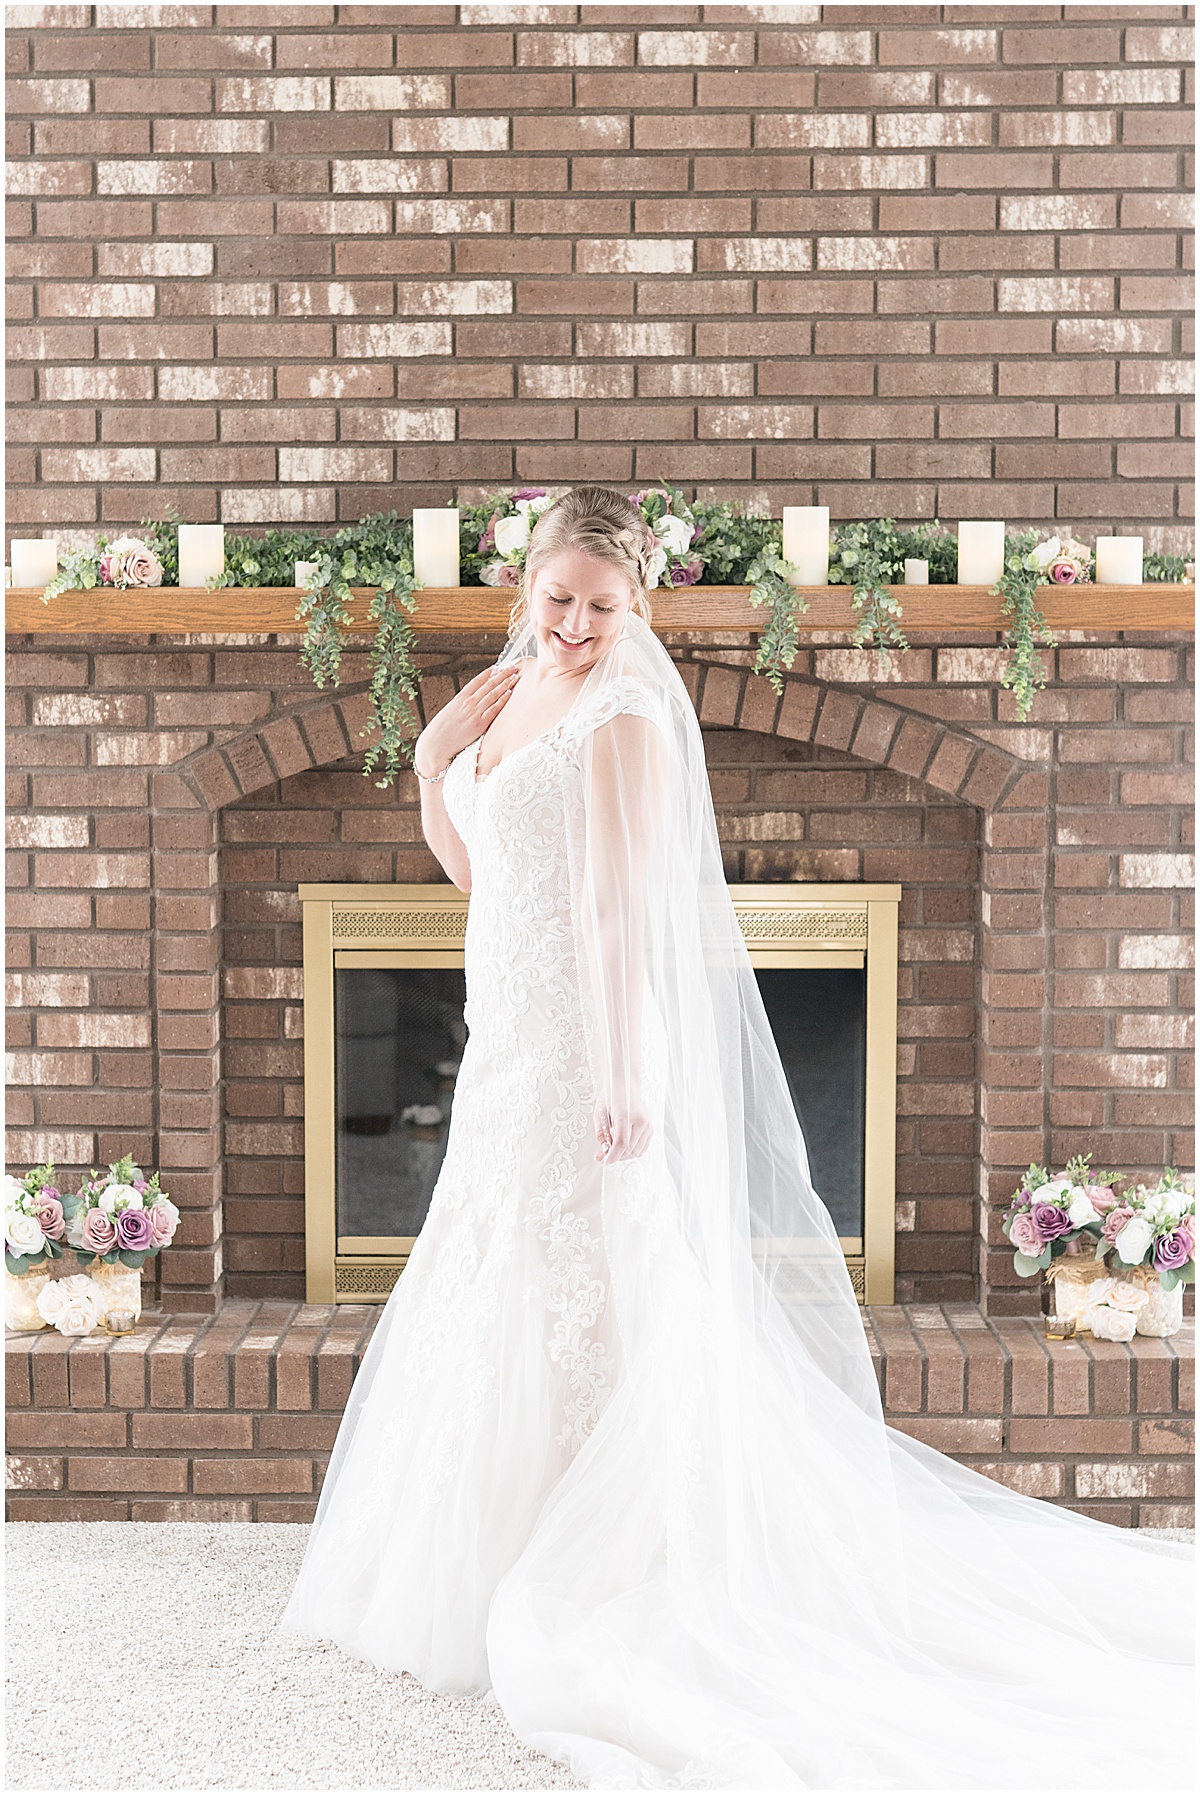 Bridal portraits for at-home, socially distanced wedding in Tinley Park, Illinois photographed by Victoria Rayburn Photography